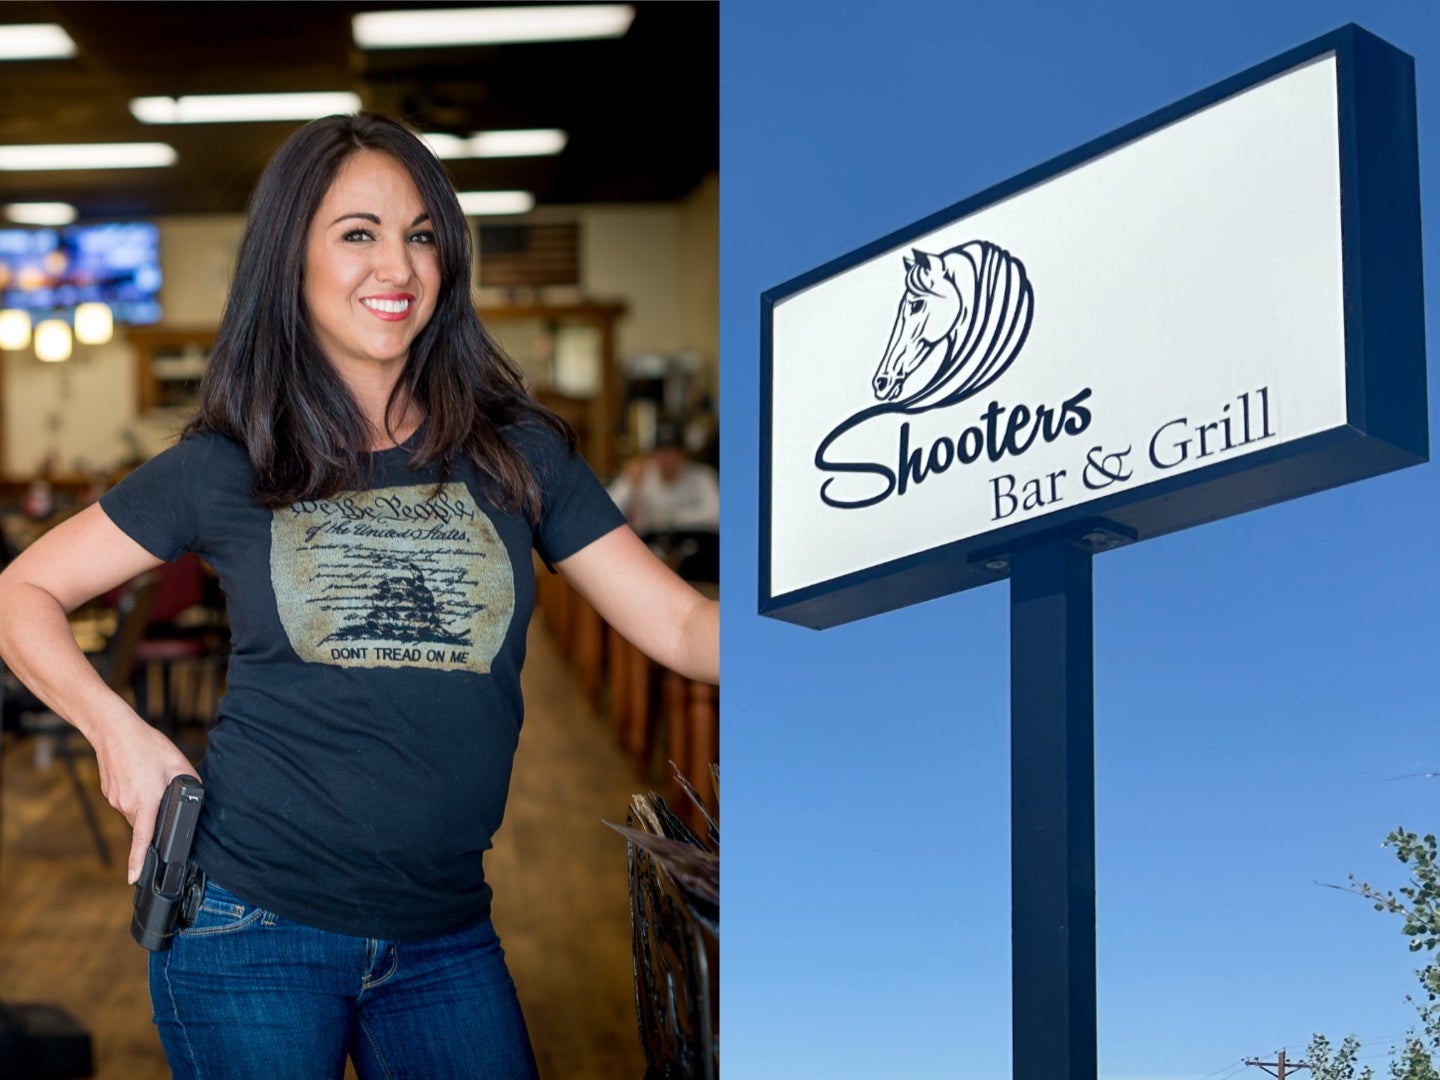 Part of Lauren Boebert’s fame came from her gun-themed restaurant Shooters Grill in Rifle, Colorado — Boebert has left that district and closed her restaurant, but another Shooters exists in the distract she’s desperately hoping to win next week